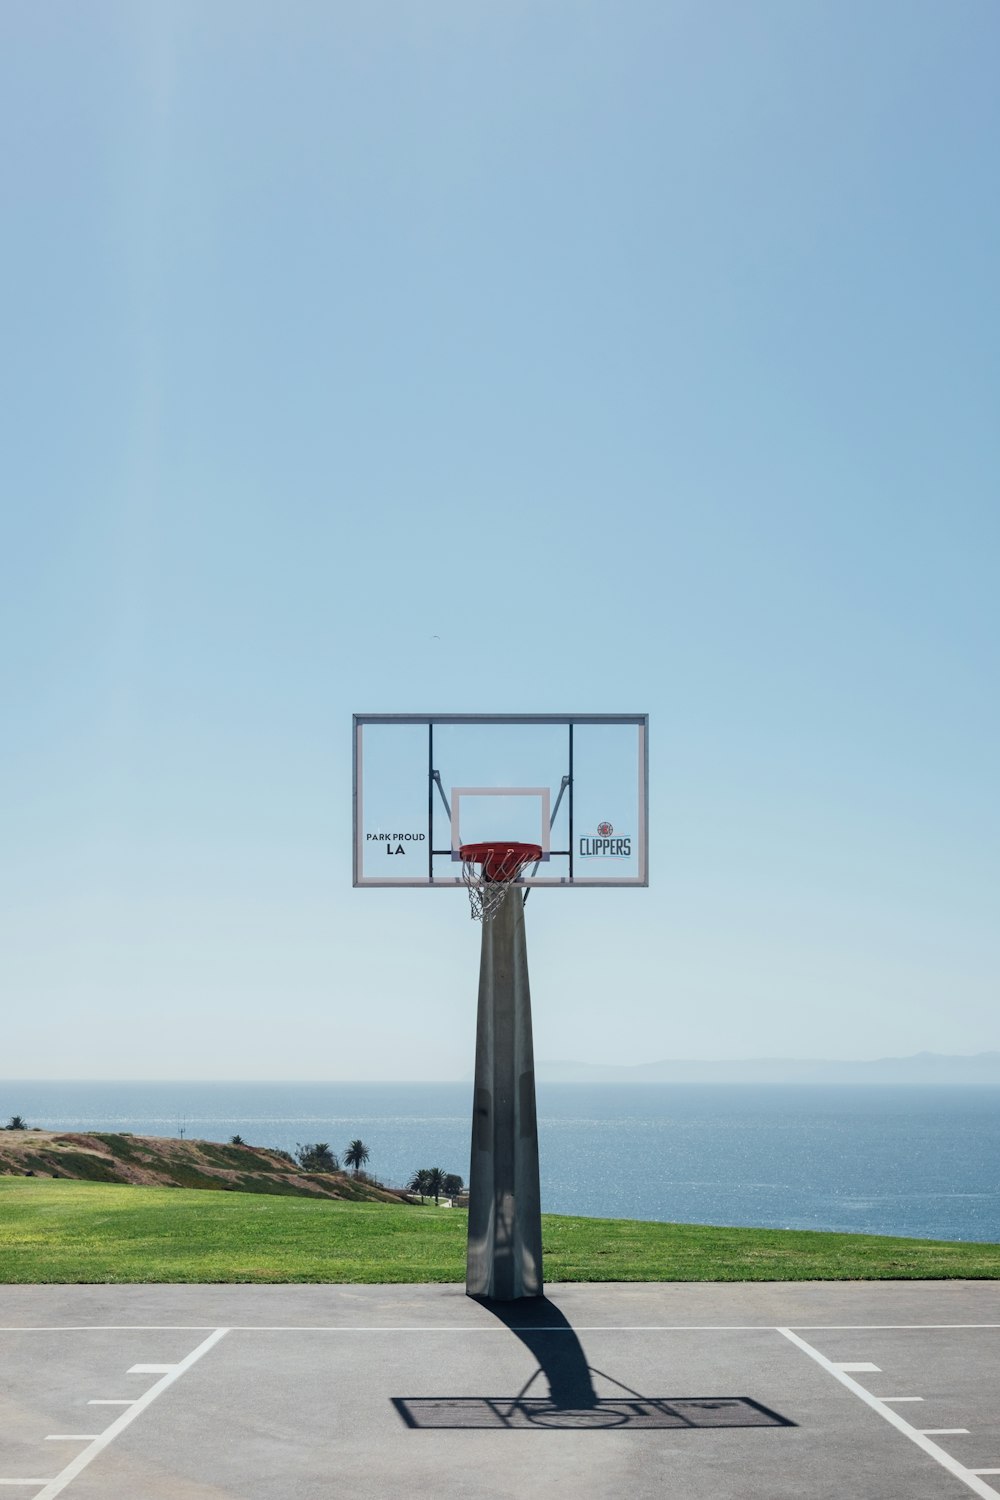 outdoor basketball court near body of water